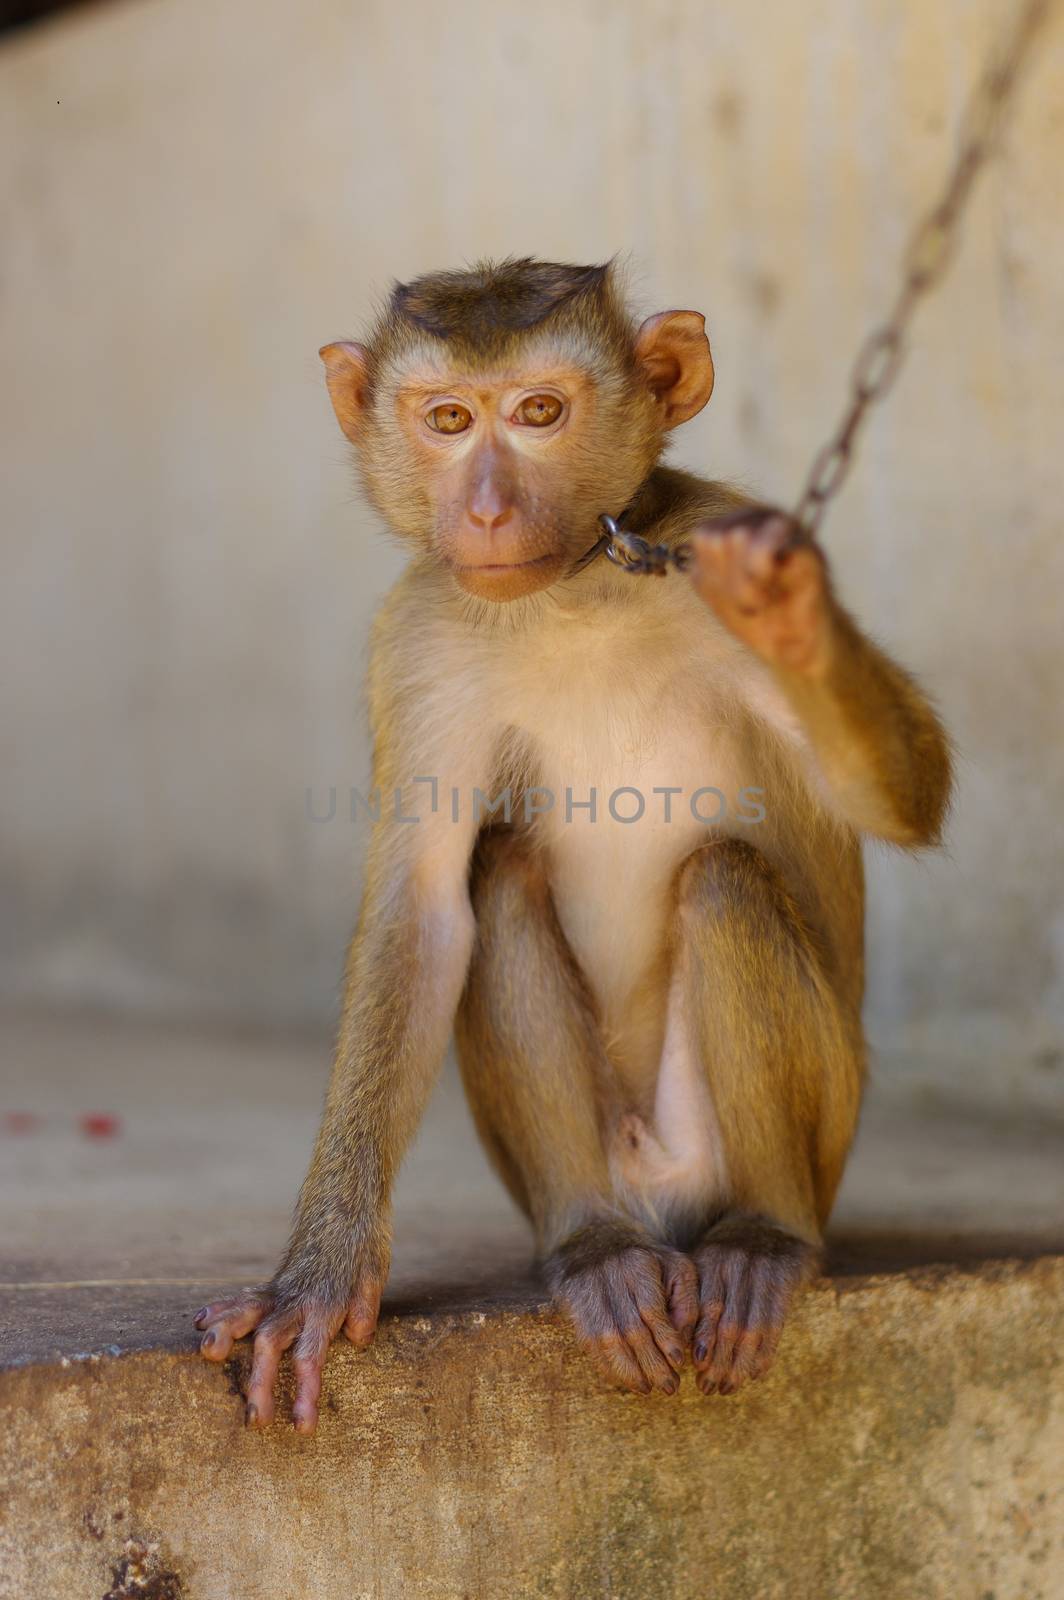 Young brown macaca monkey in Chains in Thailand by evolutionnow